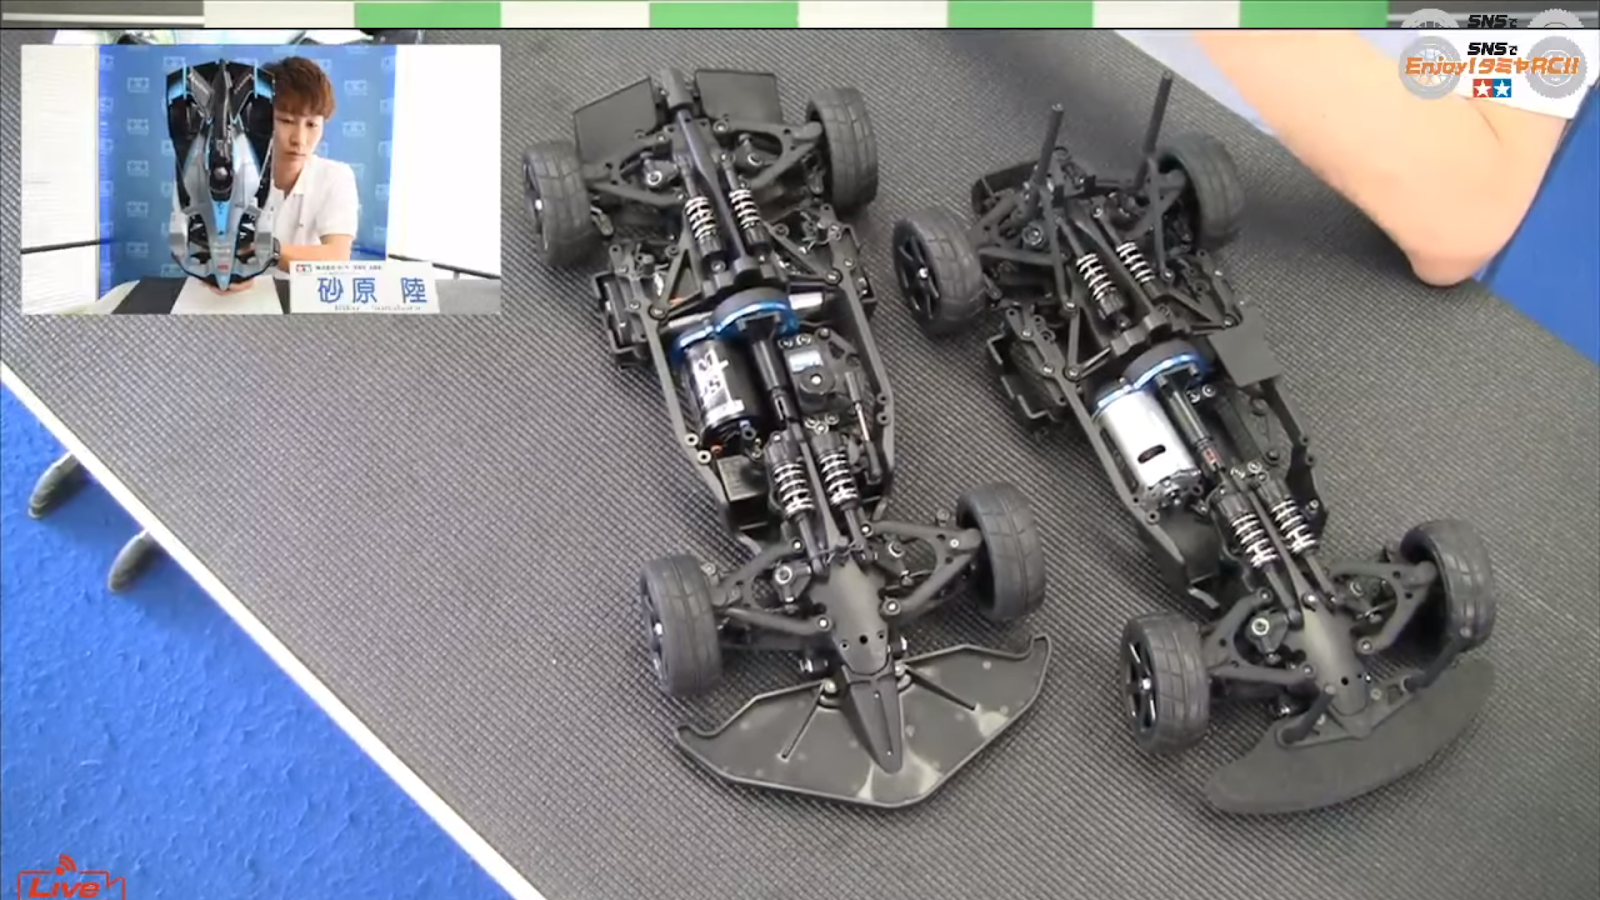 Tamiya Tc 01 Press Video And Details The Rc Racer